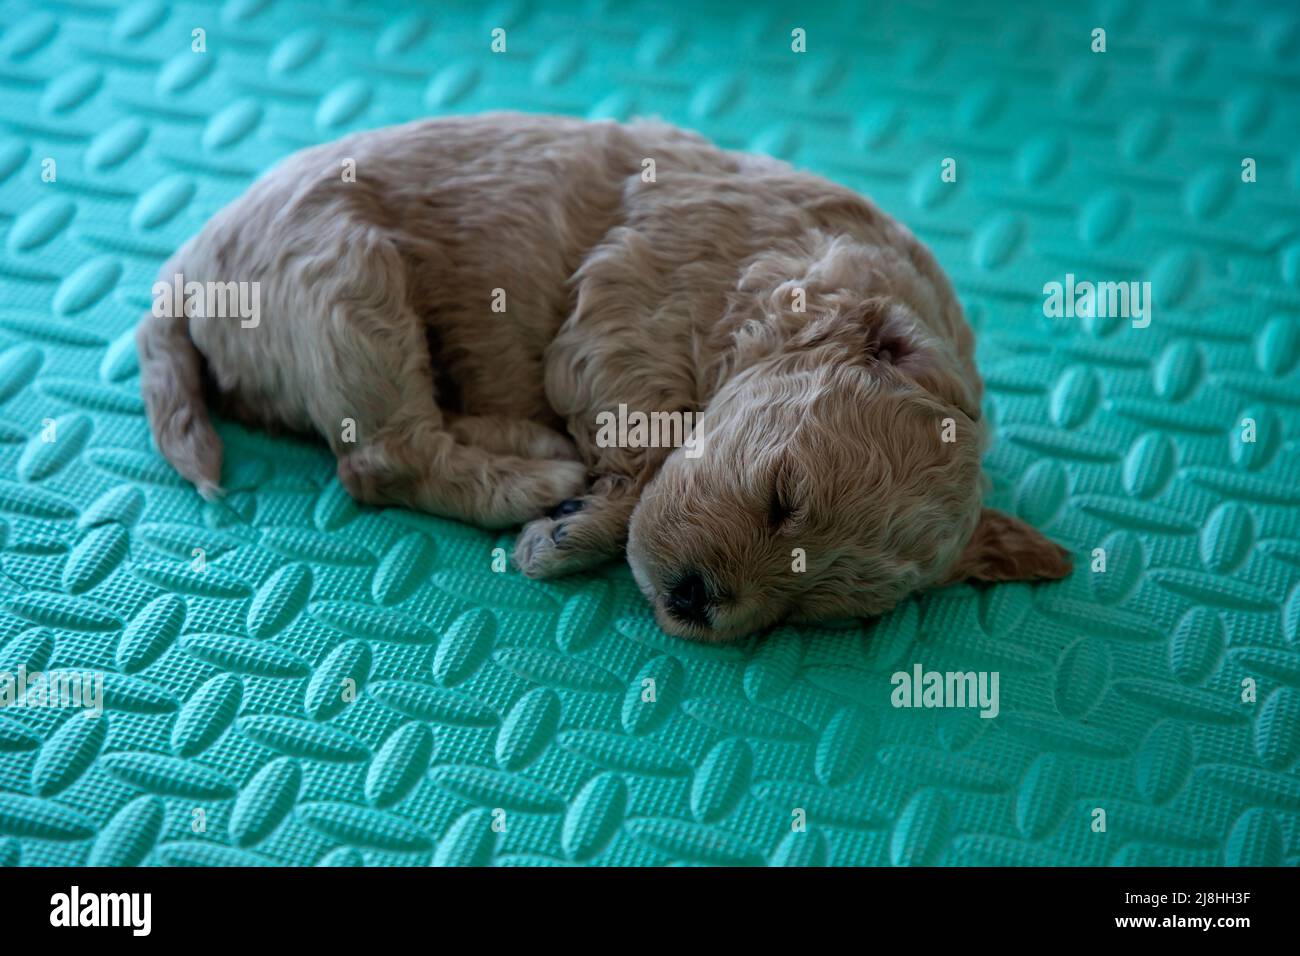 Close-up of a 3-week-old Poochon puppy (Poodle & Bichon mix) sleeping in a whelping box Stock Photo